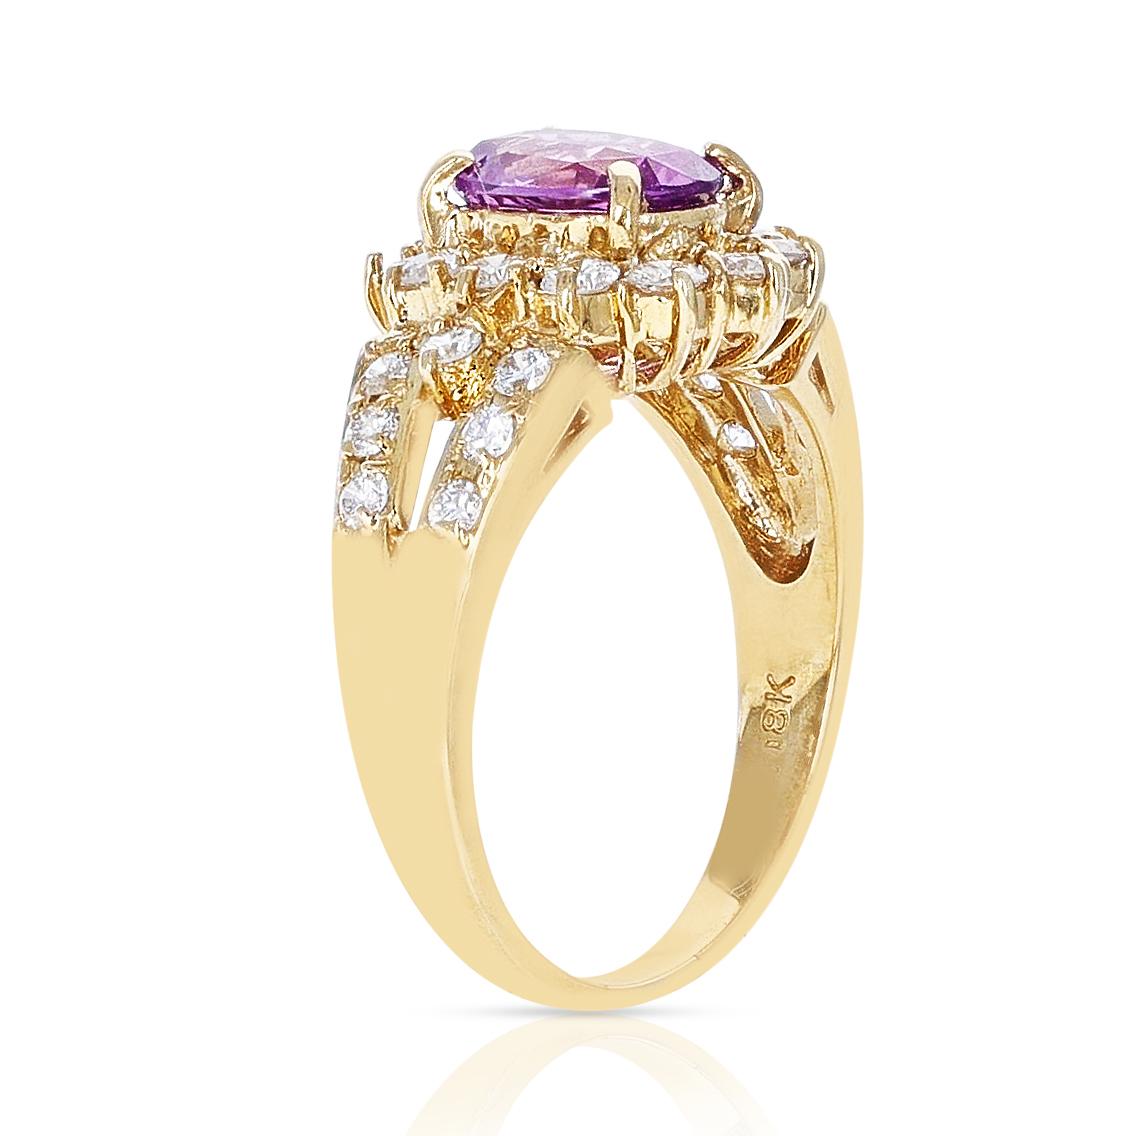 A stunning 1.72 ct. Oval Pink Sapphire and 1.30 ct. Diamond Ring made in 18 Karat Yellow Gold. The total weight of the ring is 5.76 grams and the ring size is US 7.50. 